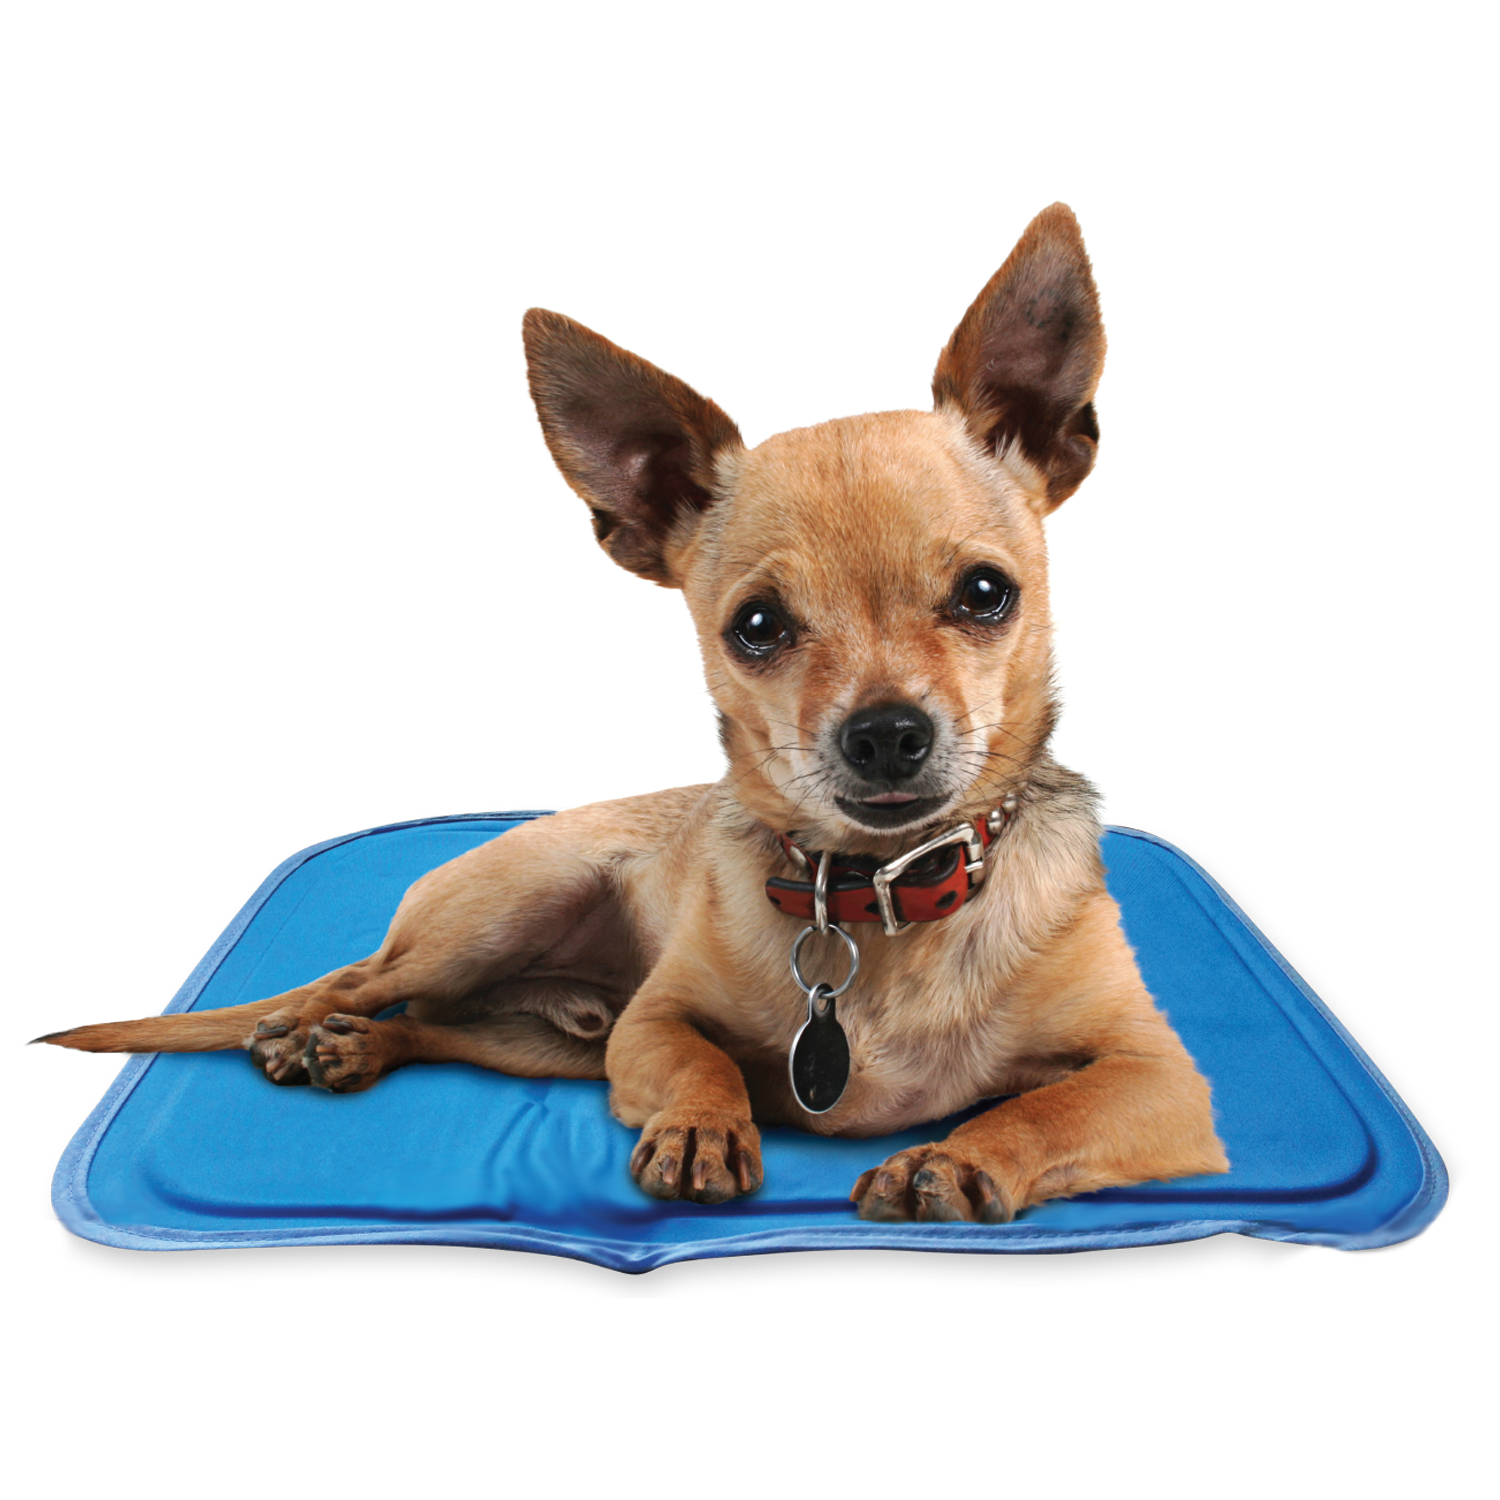 The Green Pet Shop Dog Mat, Extra Large - Pressure Activated Cooling Pad,  (80 Plus Lb.) - Non-Toxic Gel, No Water or Electricity Needed for This XL